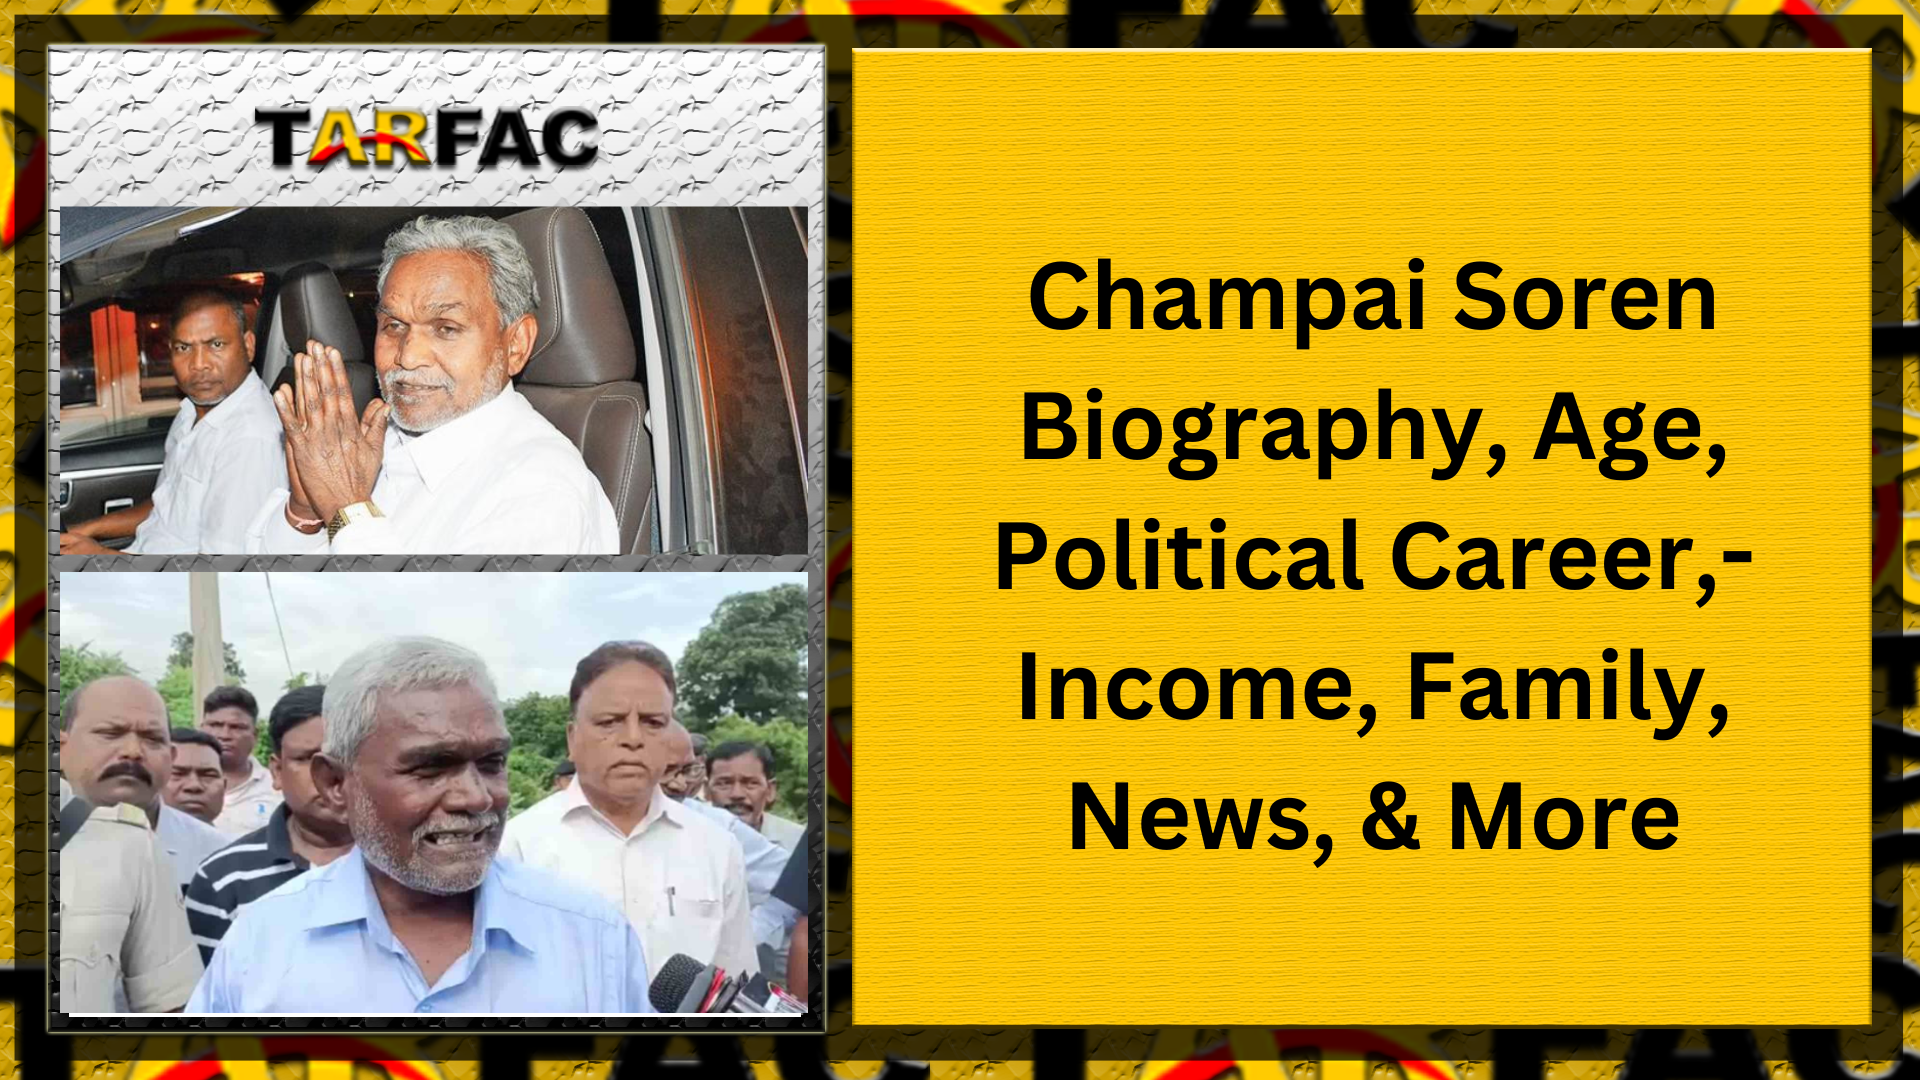 You are currently viewing Champai Soren Biography, Age, Political Career,- Income, Family, News, & More